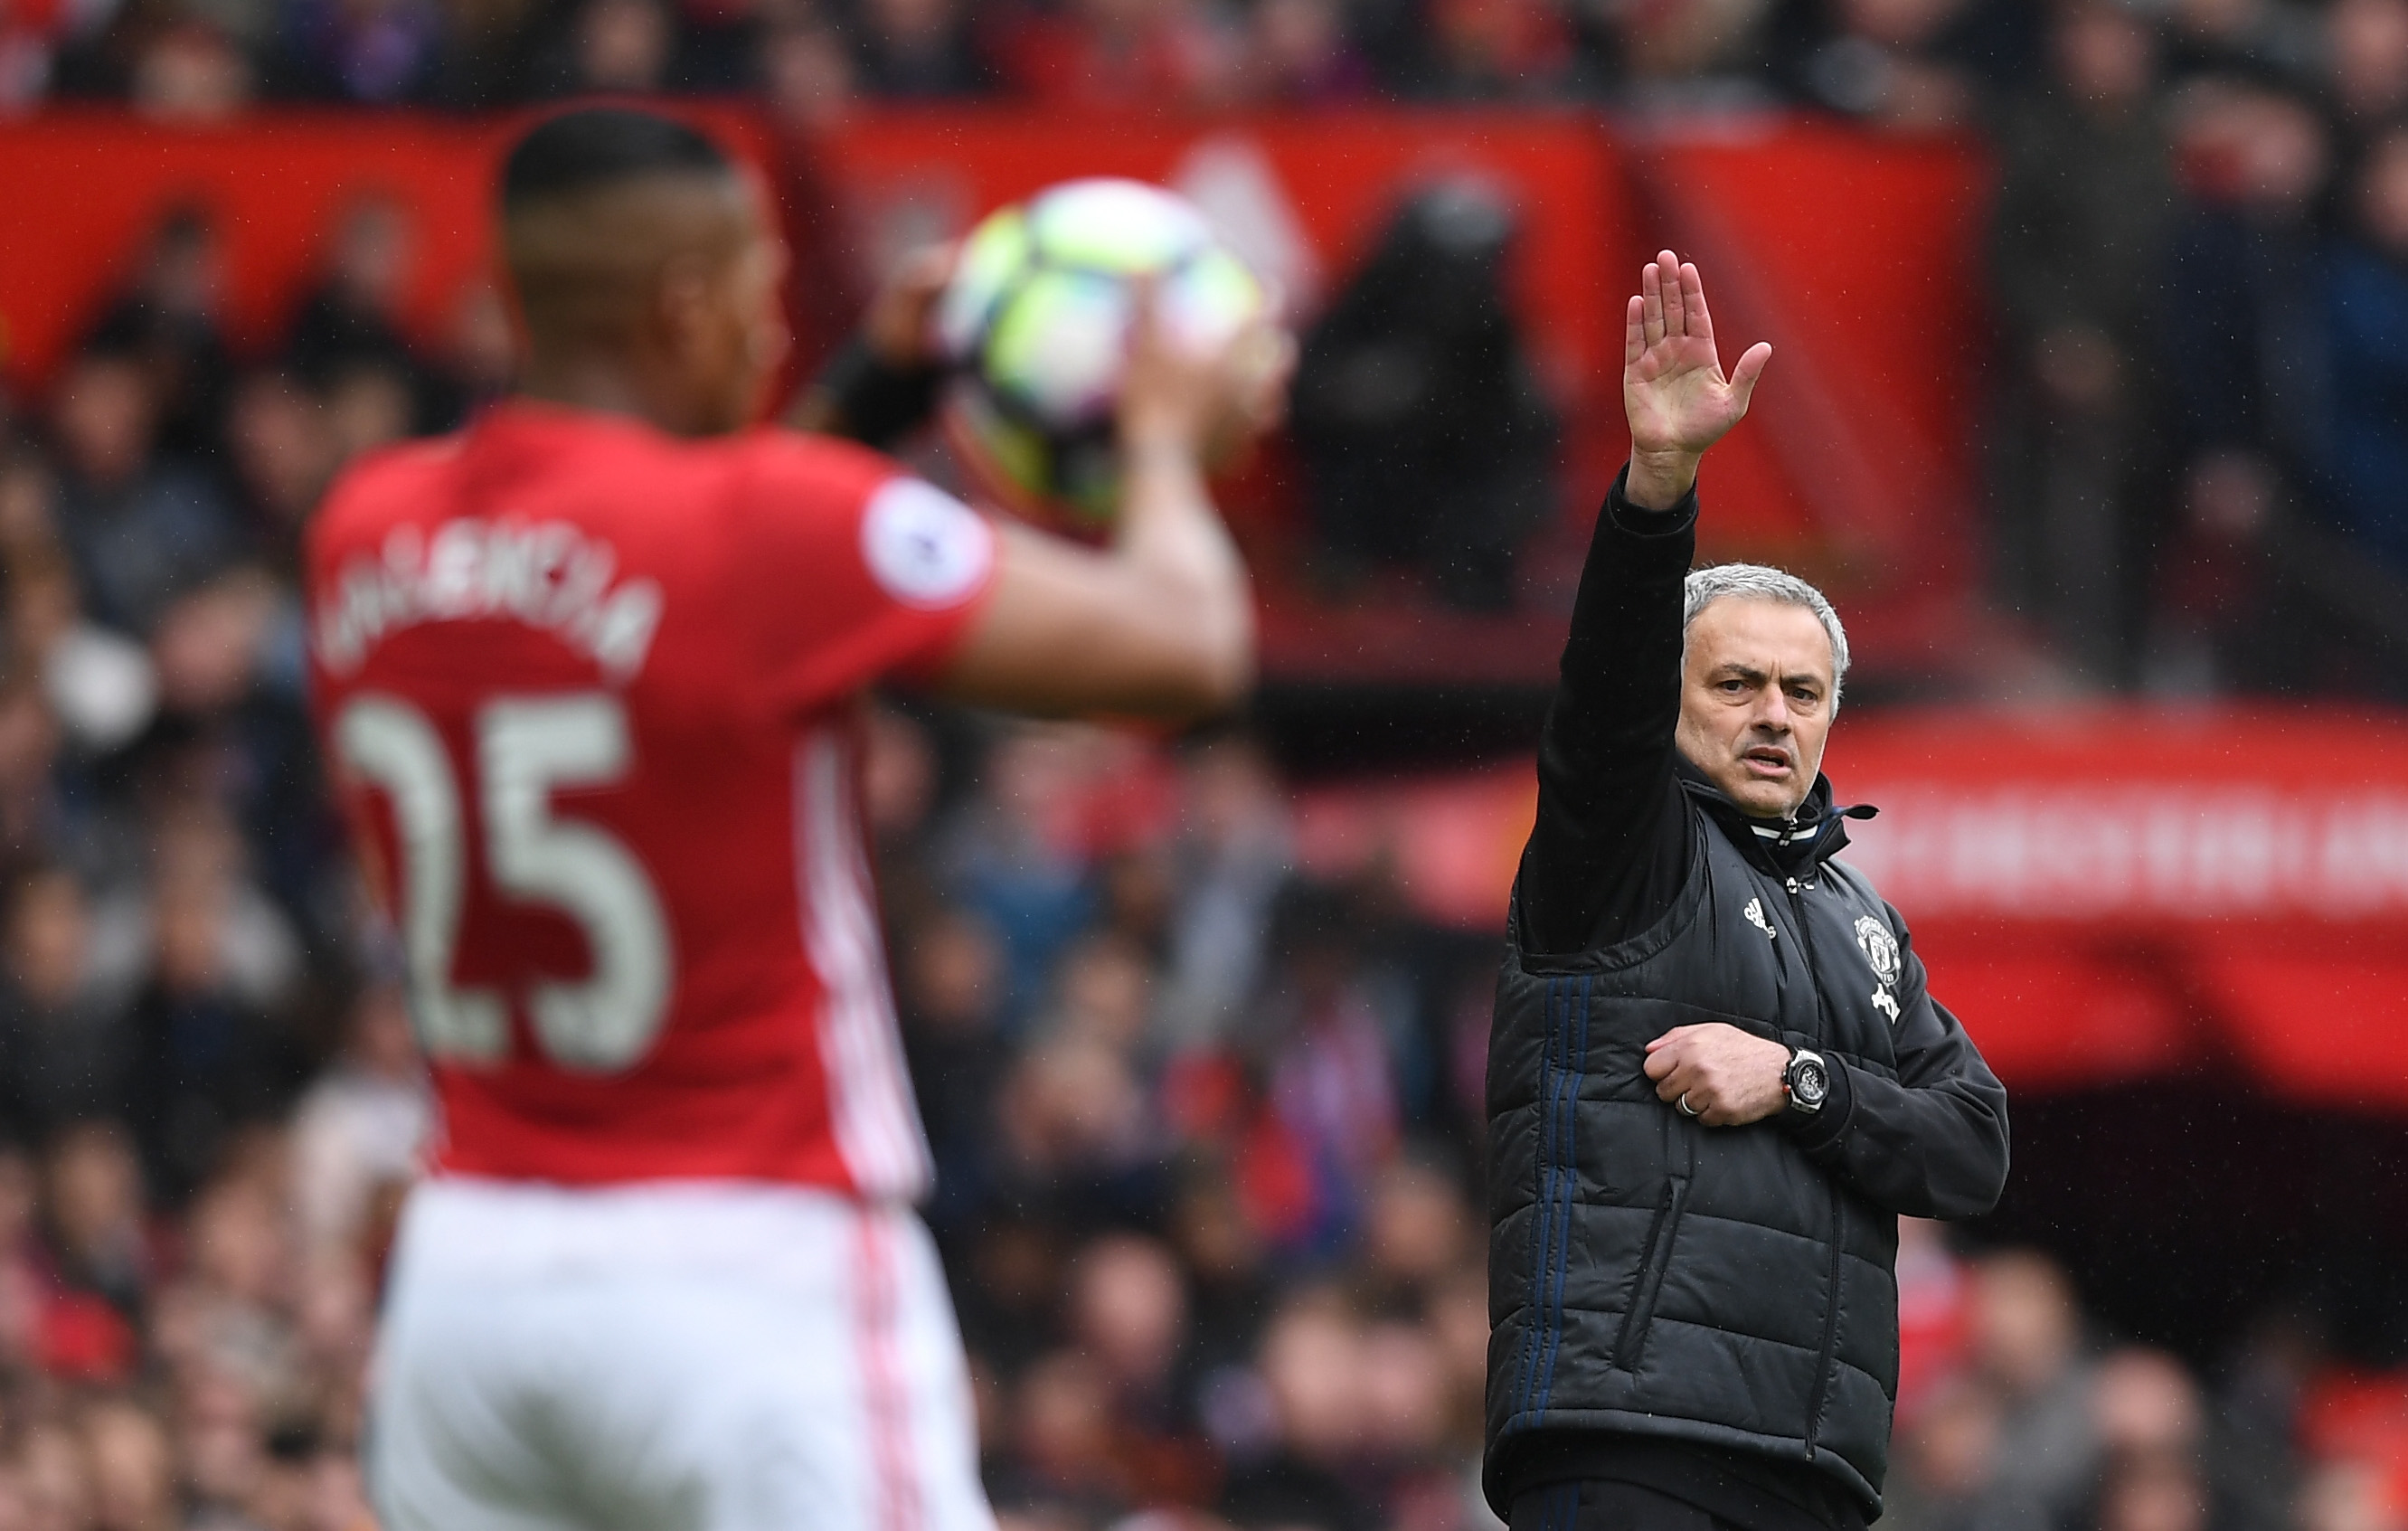 MANCHESTER, ENGLAND - APRIL 16:  Jose Mourinho manager of Manchester United signals as Antonio Valencia of Manchester United takes a throw in during the Premier League match between Manchester United and Chelsea at Old Trafford on April 16, 2017 in Manchester, England.  (Photo by Shaun Botterill/Getty Images)